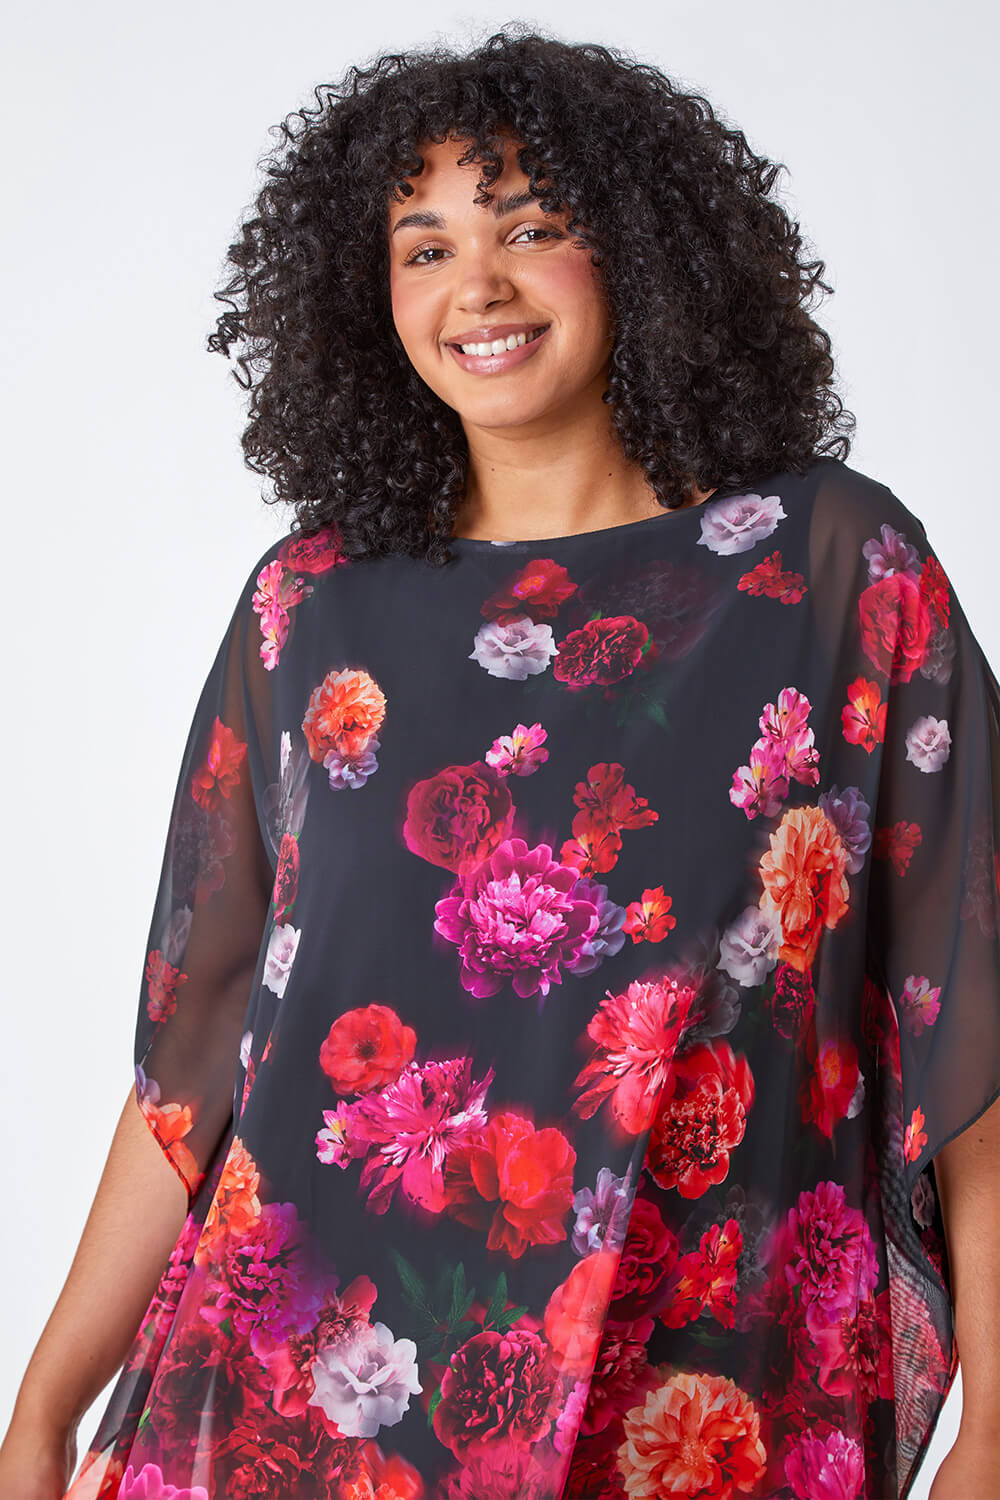 PINK Curve Floral Print Chiffon Overlay Top, Image 4 of 5